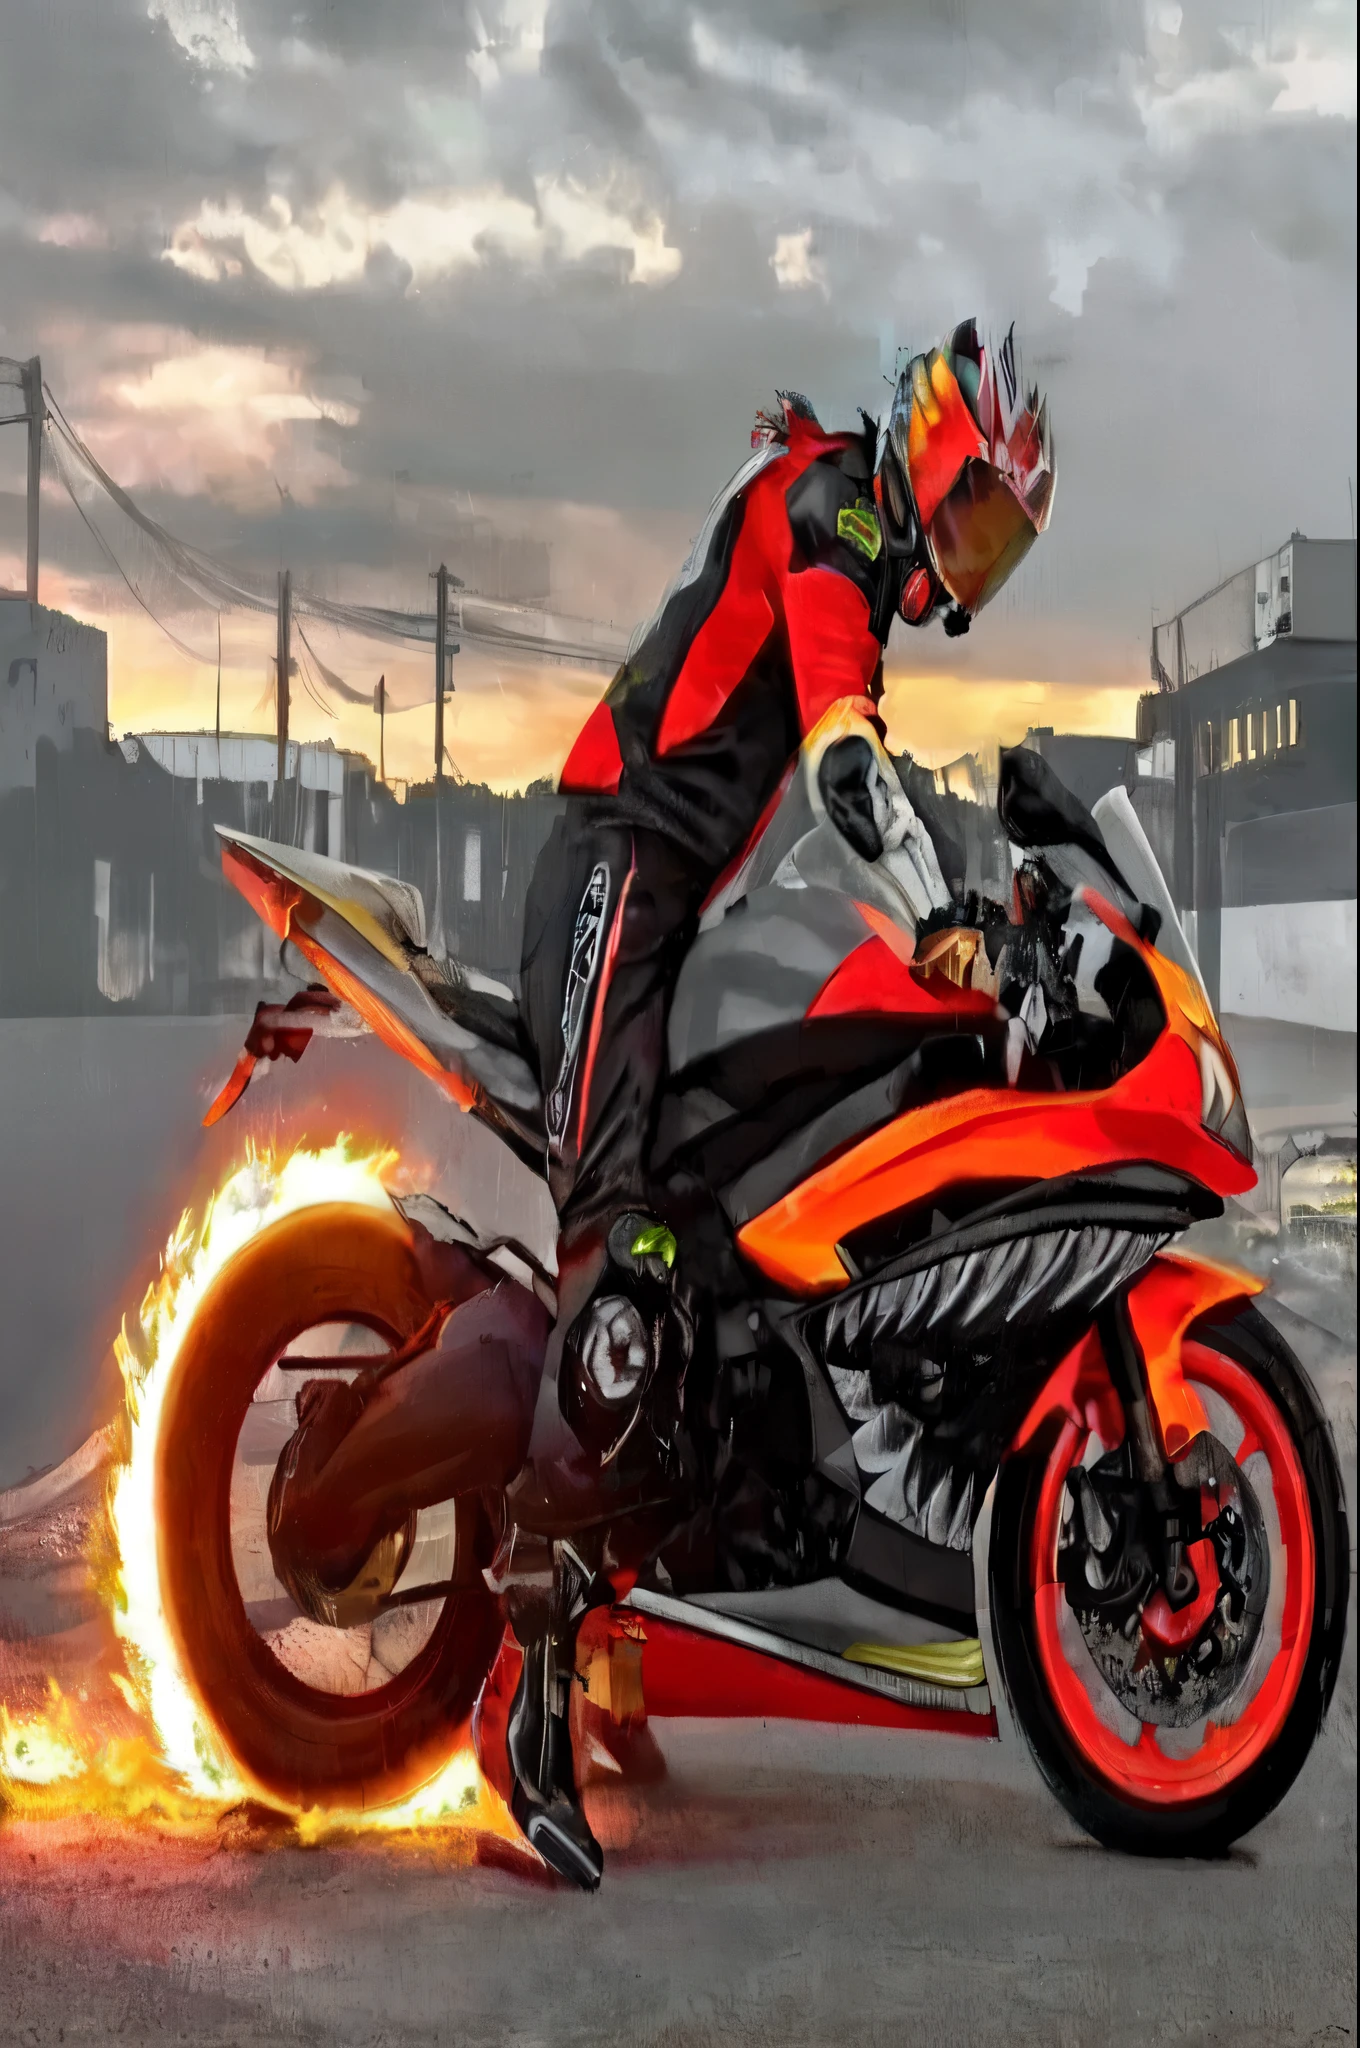 arafed man on a motorcycle with a fire wheel, on fire, fire!! full body, ghost rider, intense flames, firerstorm, cyberpunk flame suit, motorbiker, motorcycle, firey, motorcycles, ❤🔥🍄🌪, flames everywhere, fire reak real life, lots of flames, fire behind him, flame thrower